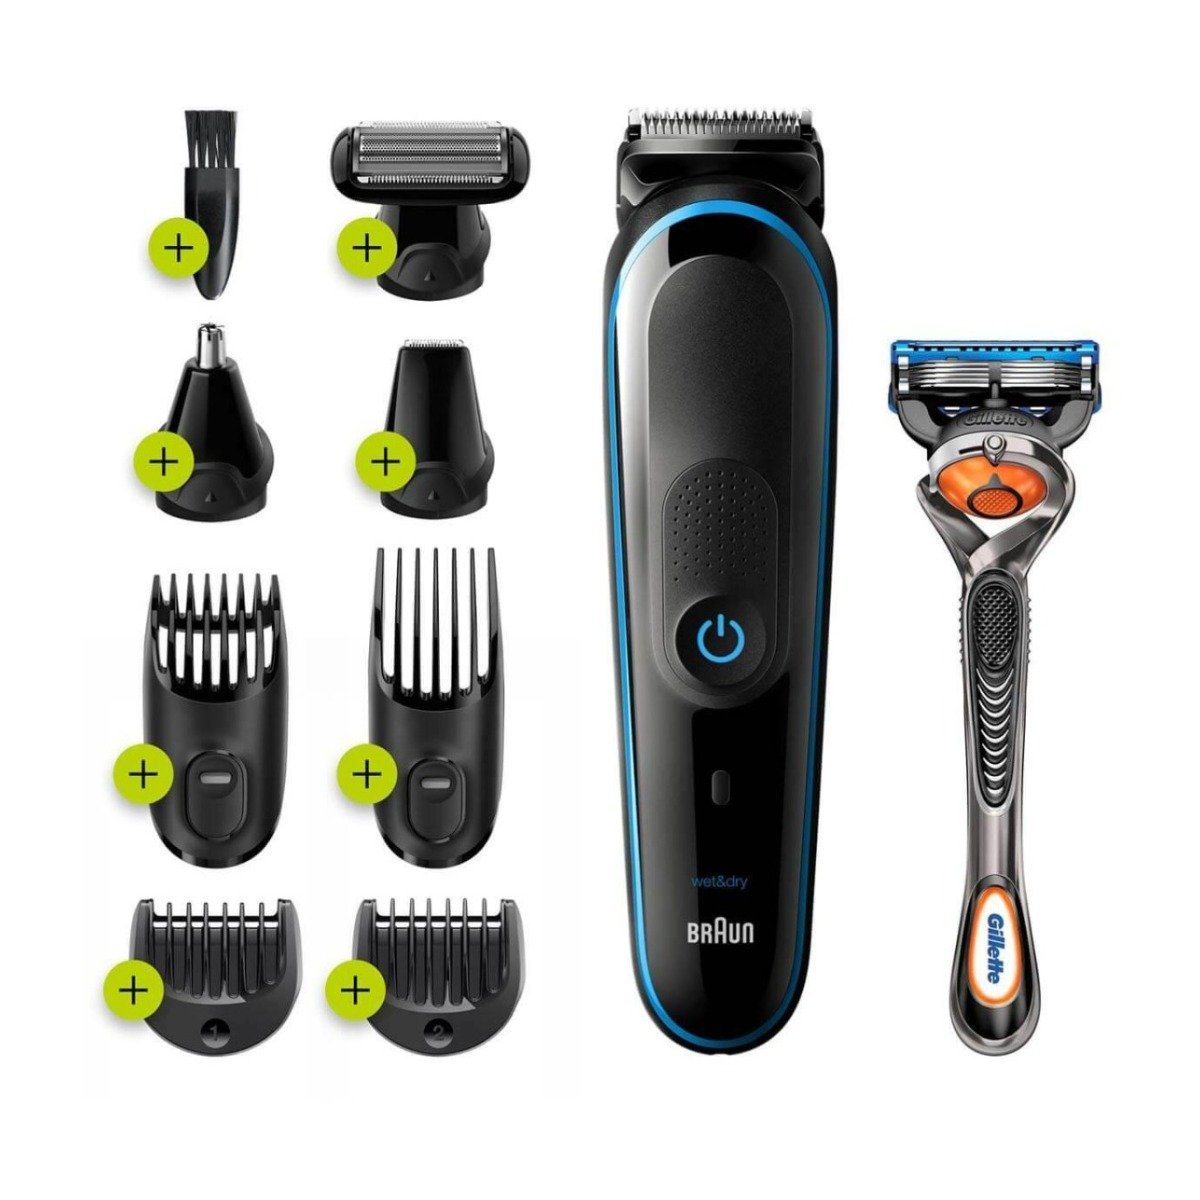 Braun All-In-One Trimmer (5) 8 in 1 Styling Kit - MGK5260 - Bloom Pharmacy